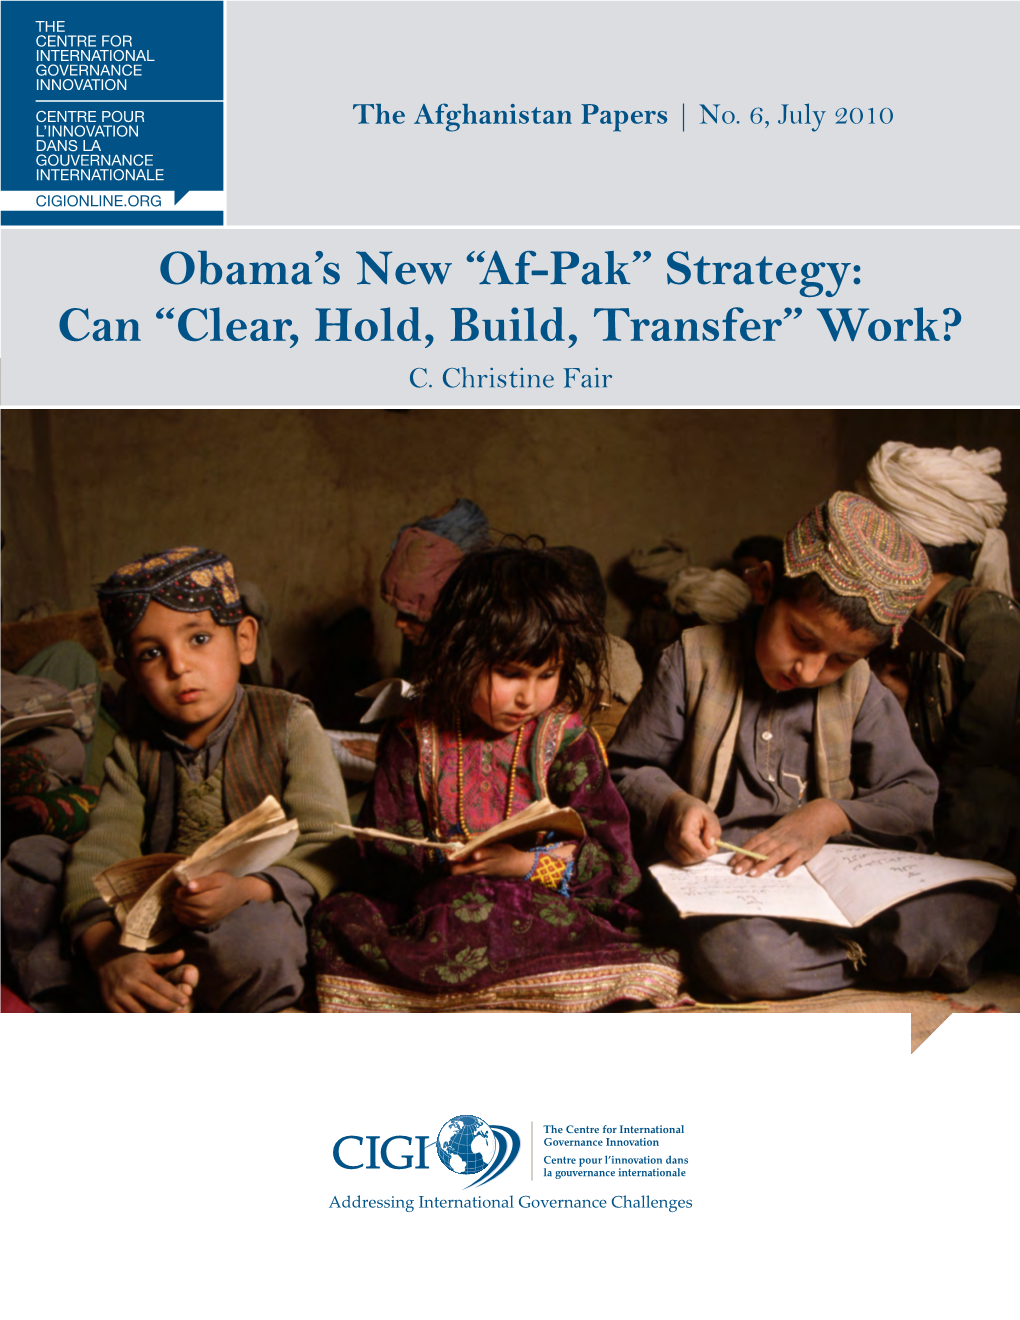 Af-Pak” Strategy: Can “Clear, Hold, Build, Transfer” Work? C